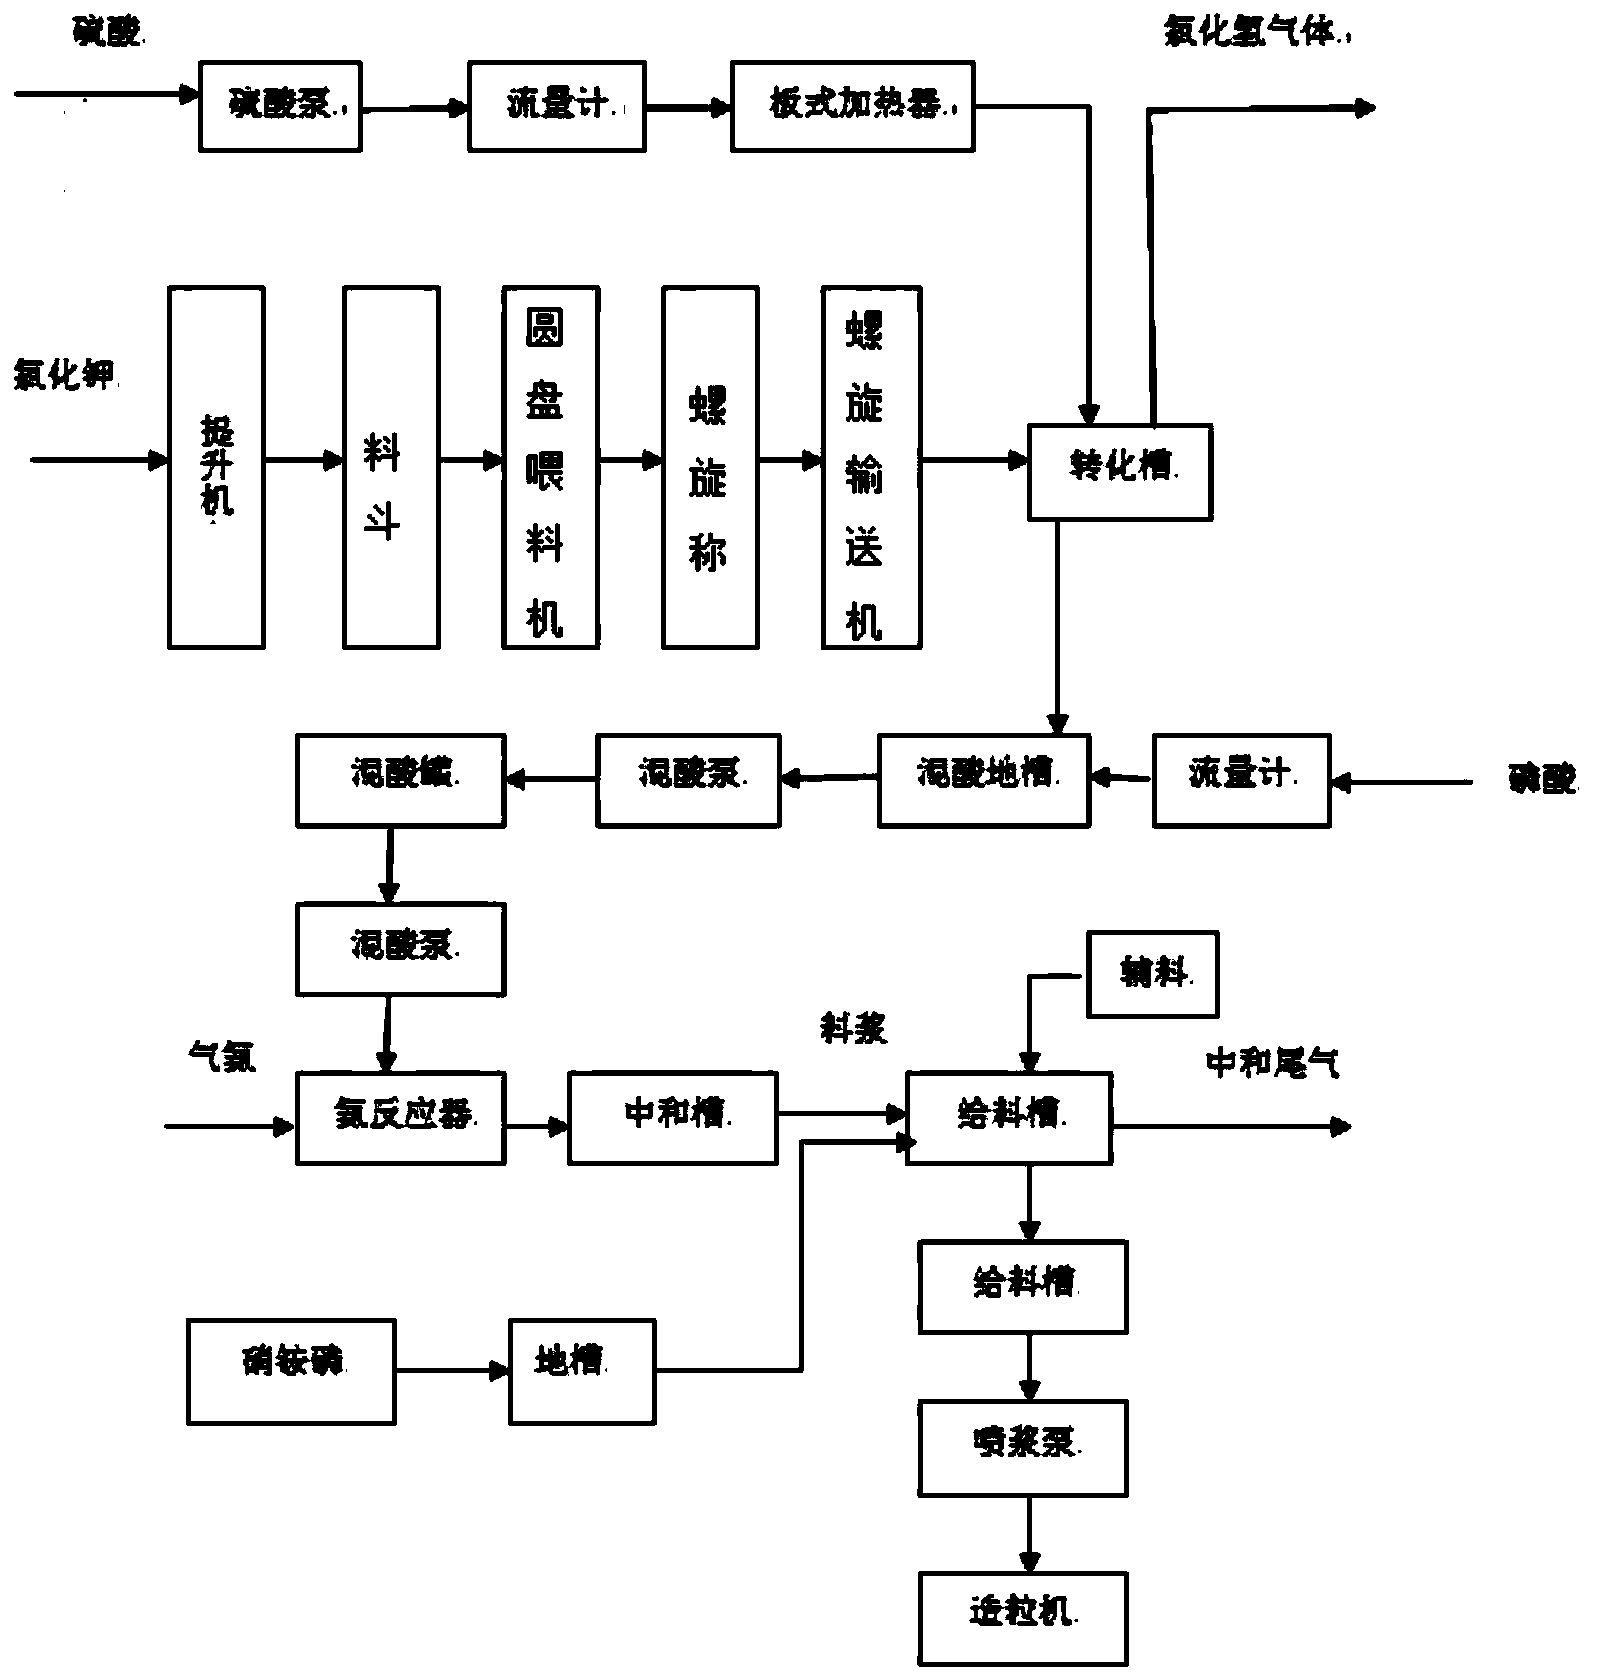 Method for producing compound fertilizer containing nitrate nitrogen potassium sulphate